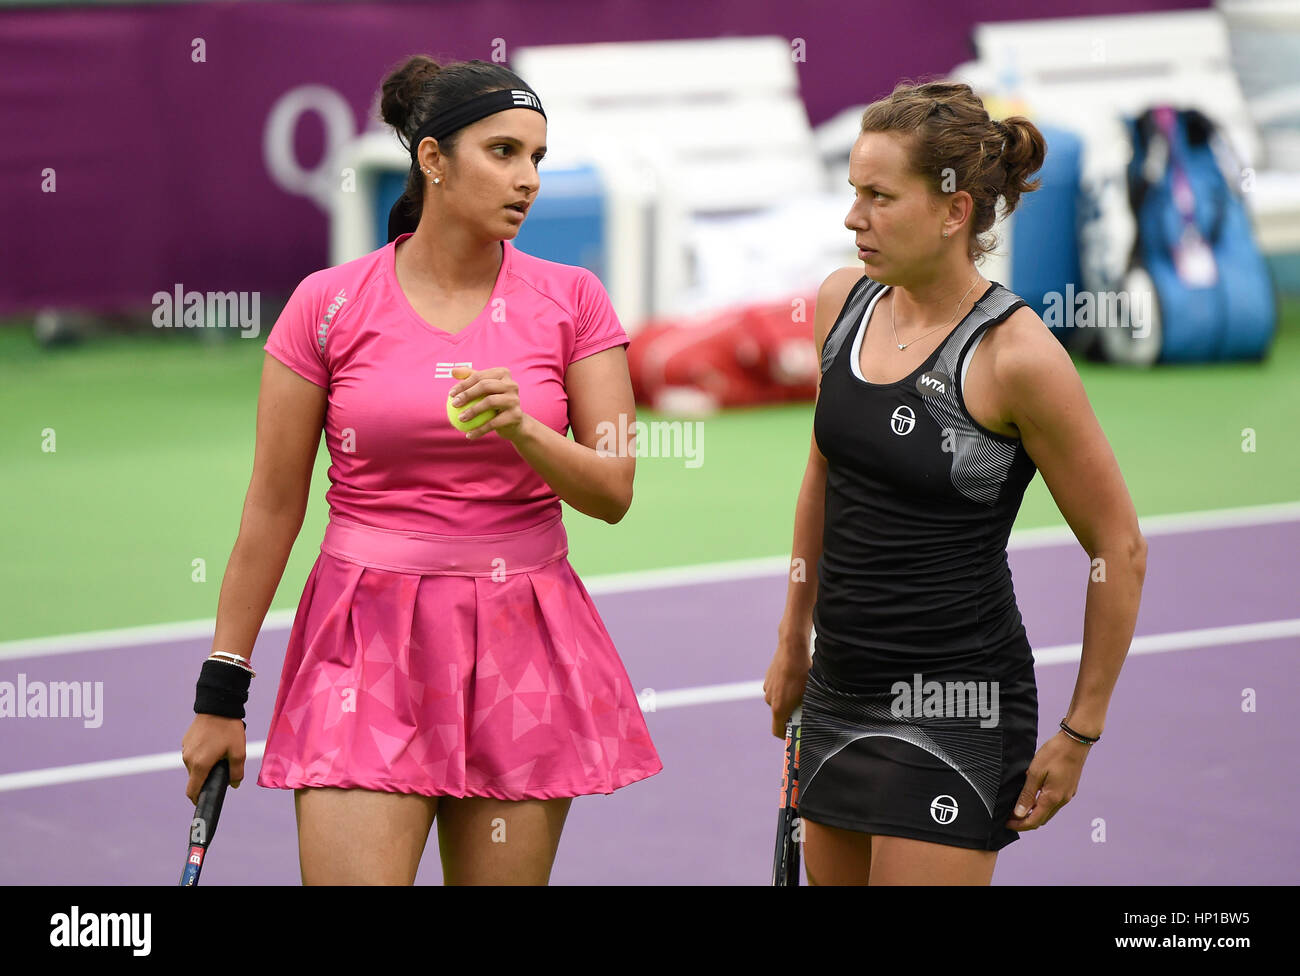 Doha, Qatar. 16th Feb, 2017. Sania Mirza (L) of India and Barbora Strycova  of Czech Republic communicate during the women's doubles 1st round match  against Xu Yifan of China and Raquel Atawo